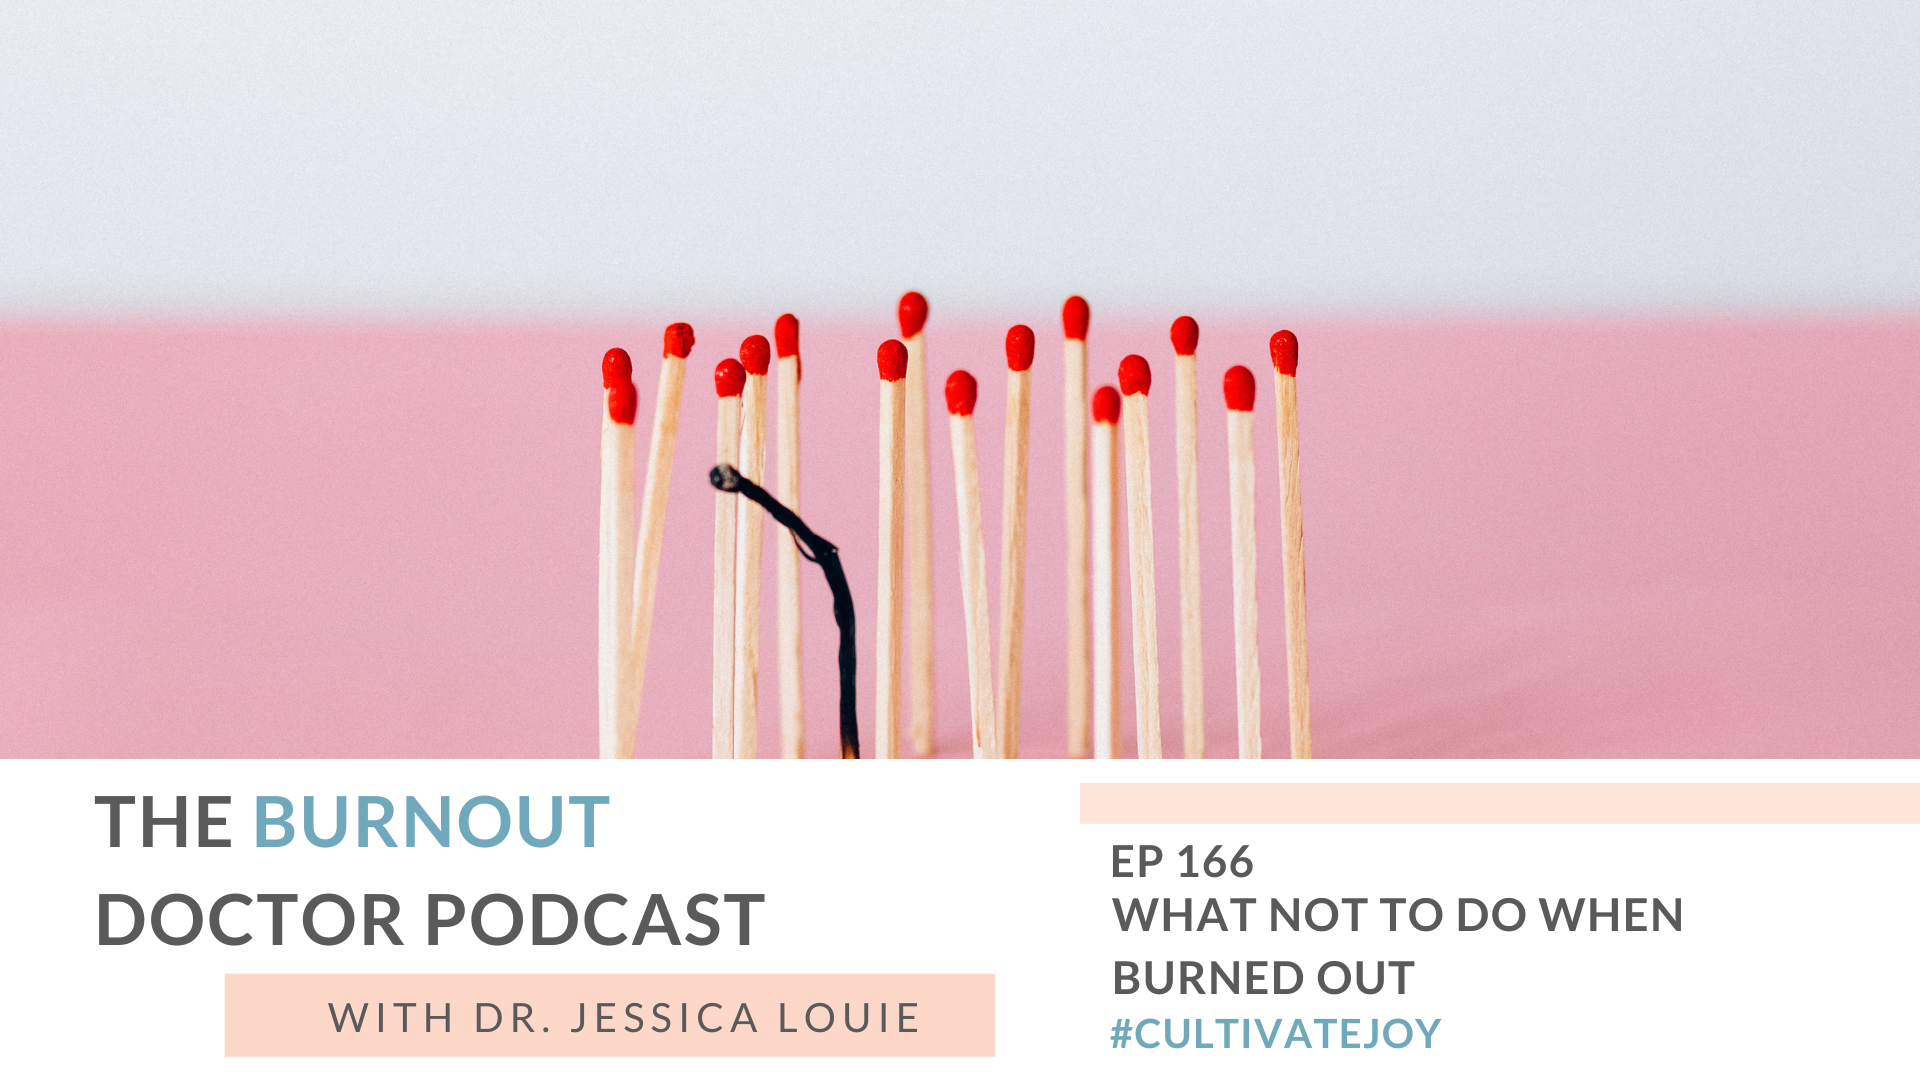 7 Things NOT to do when burned out. Pharmacist Burnout help. The Burnout Doctor Podcast. What to do to cope with burnout.